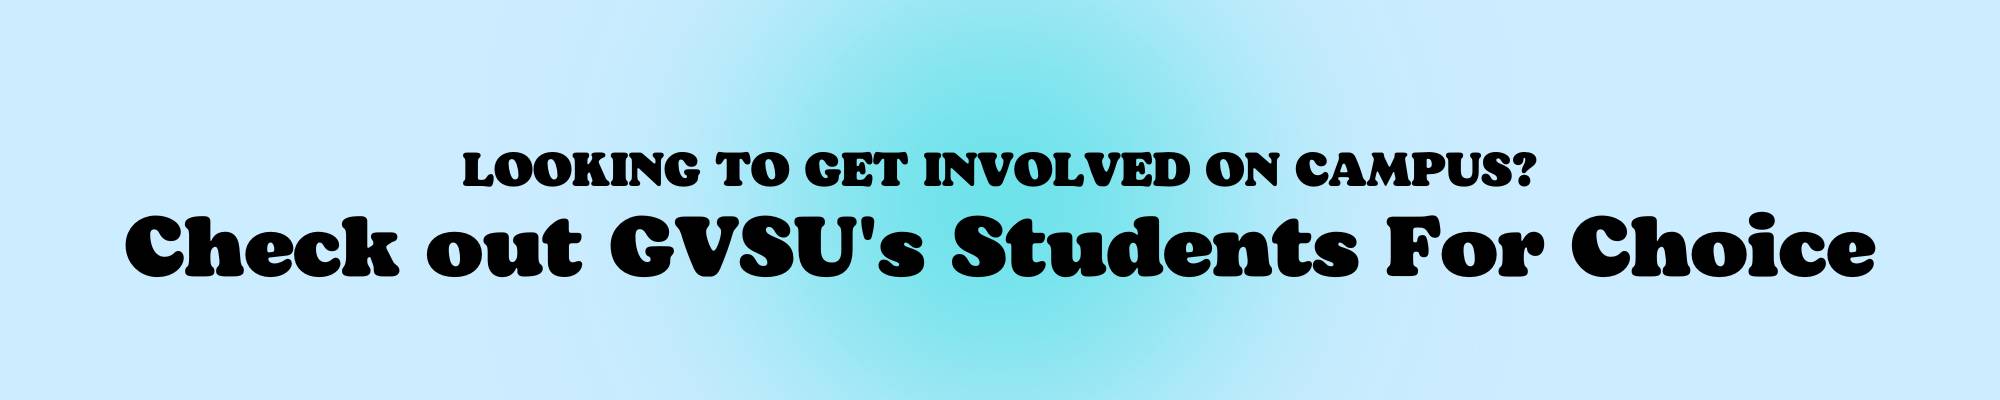 Looking to get involved on campus? Check out GVSU's Students For Choice